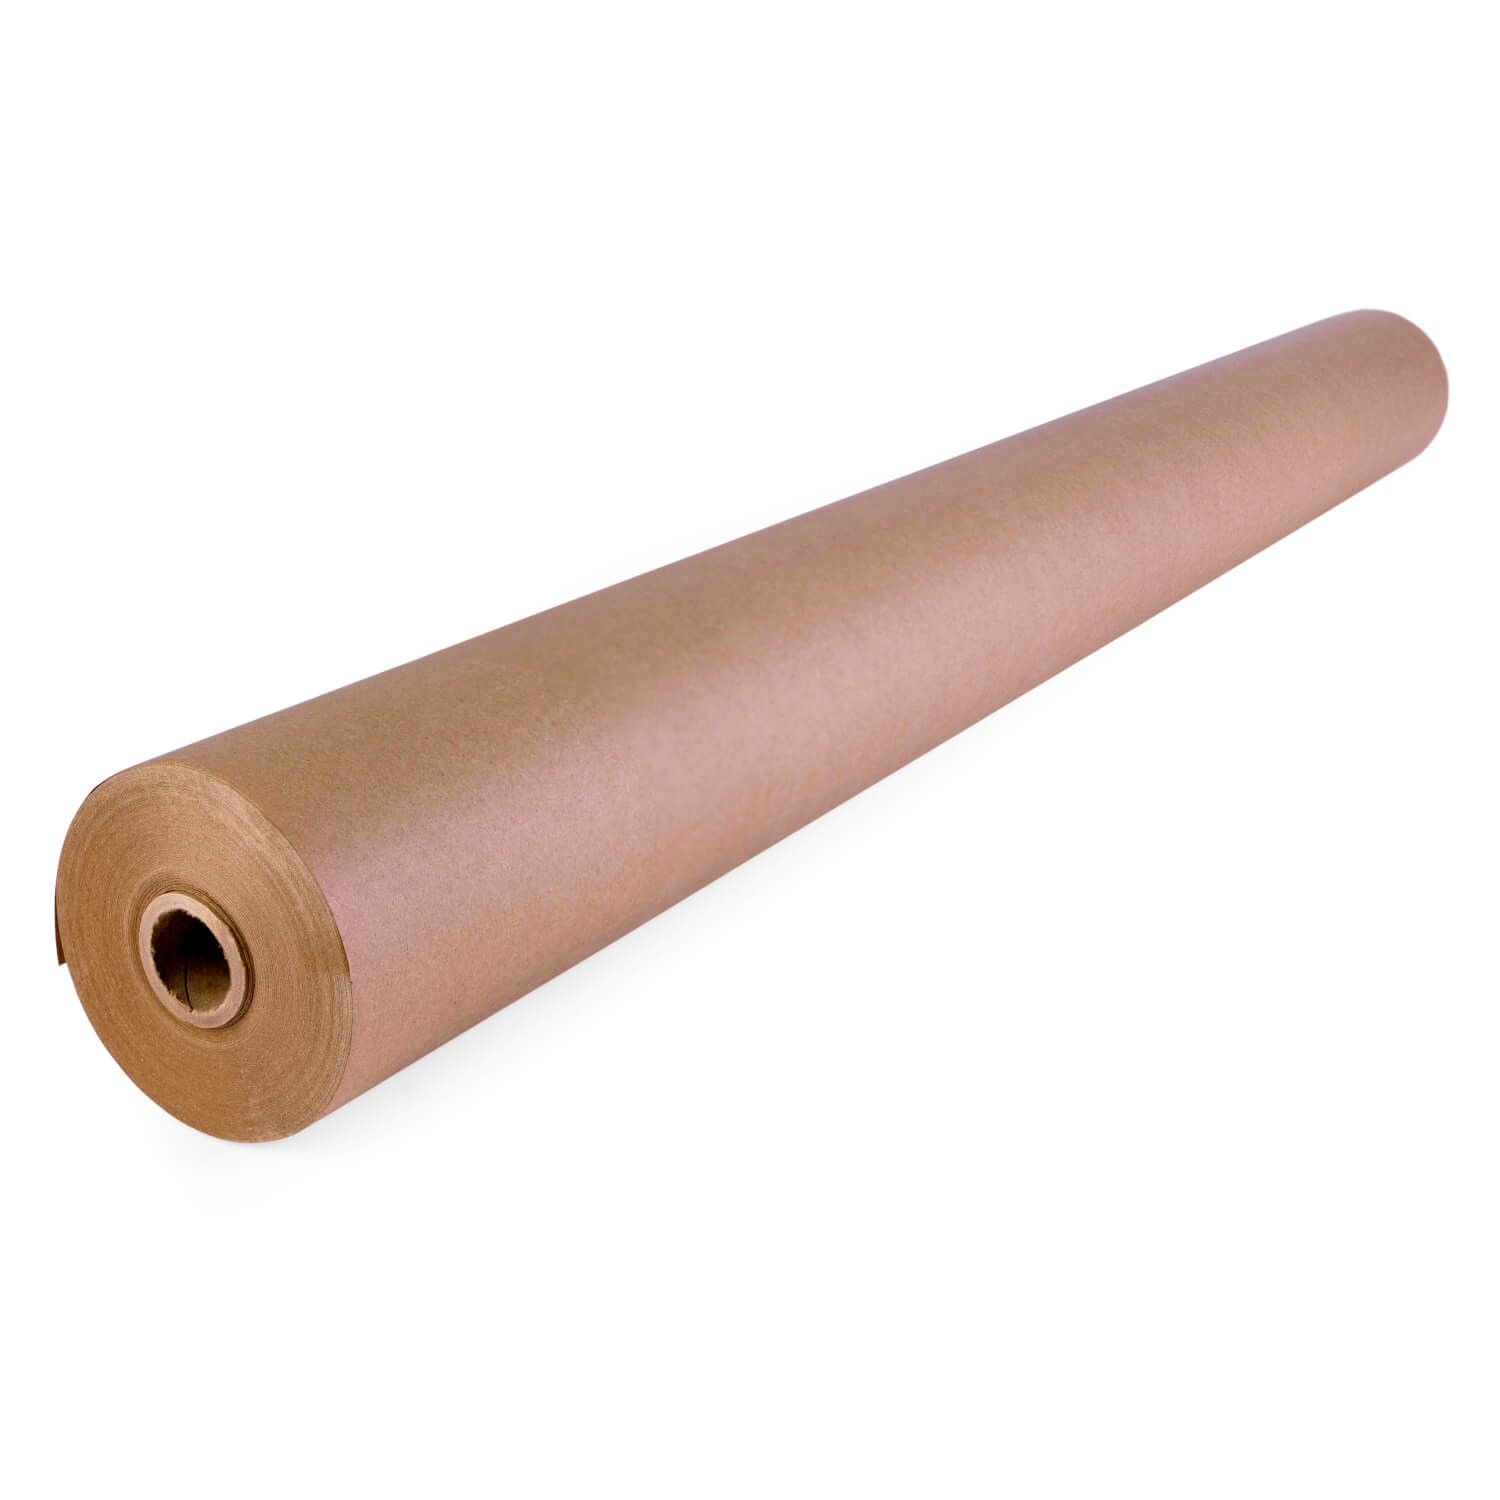 SWKR3650 36 X 1025' 50# NATURAL KRAFT ROLL, 2 OR 3 CORE